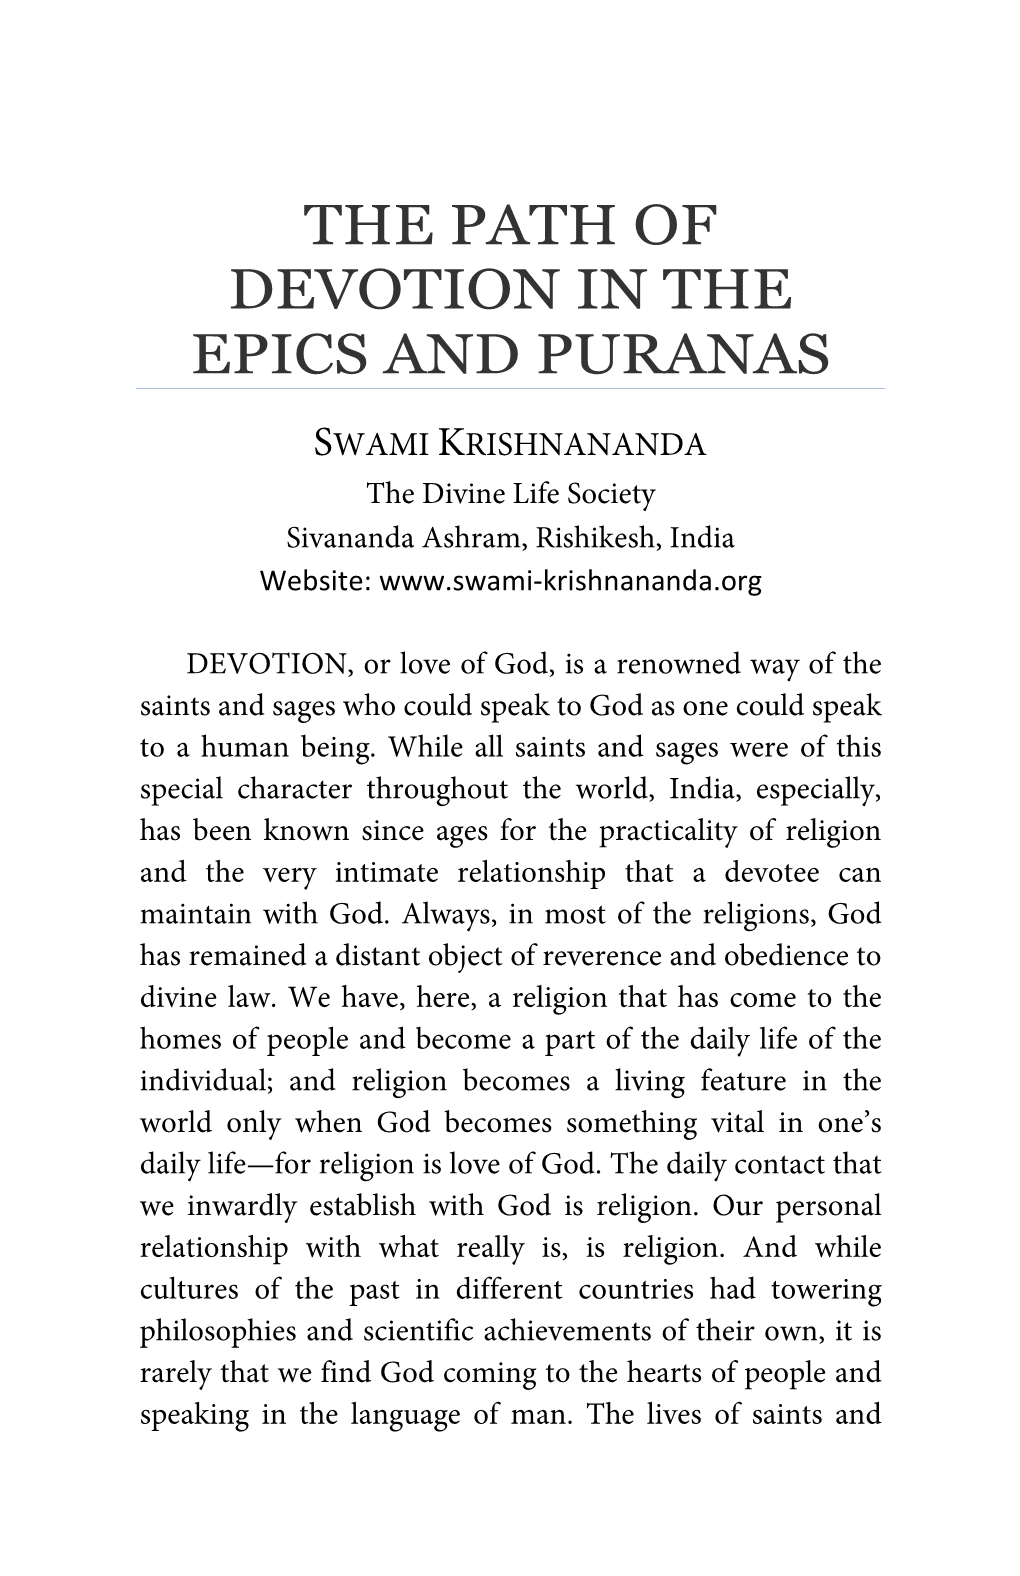 The Path of Devotion in the Epics and Puranas